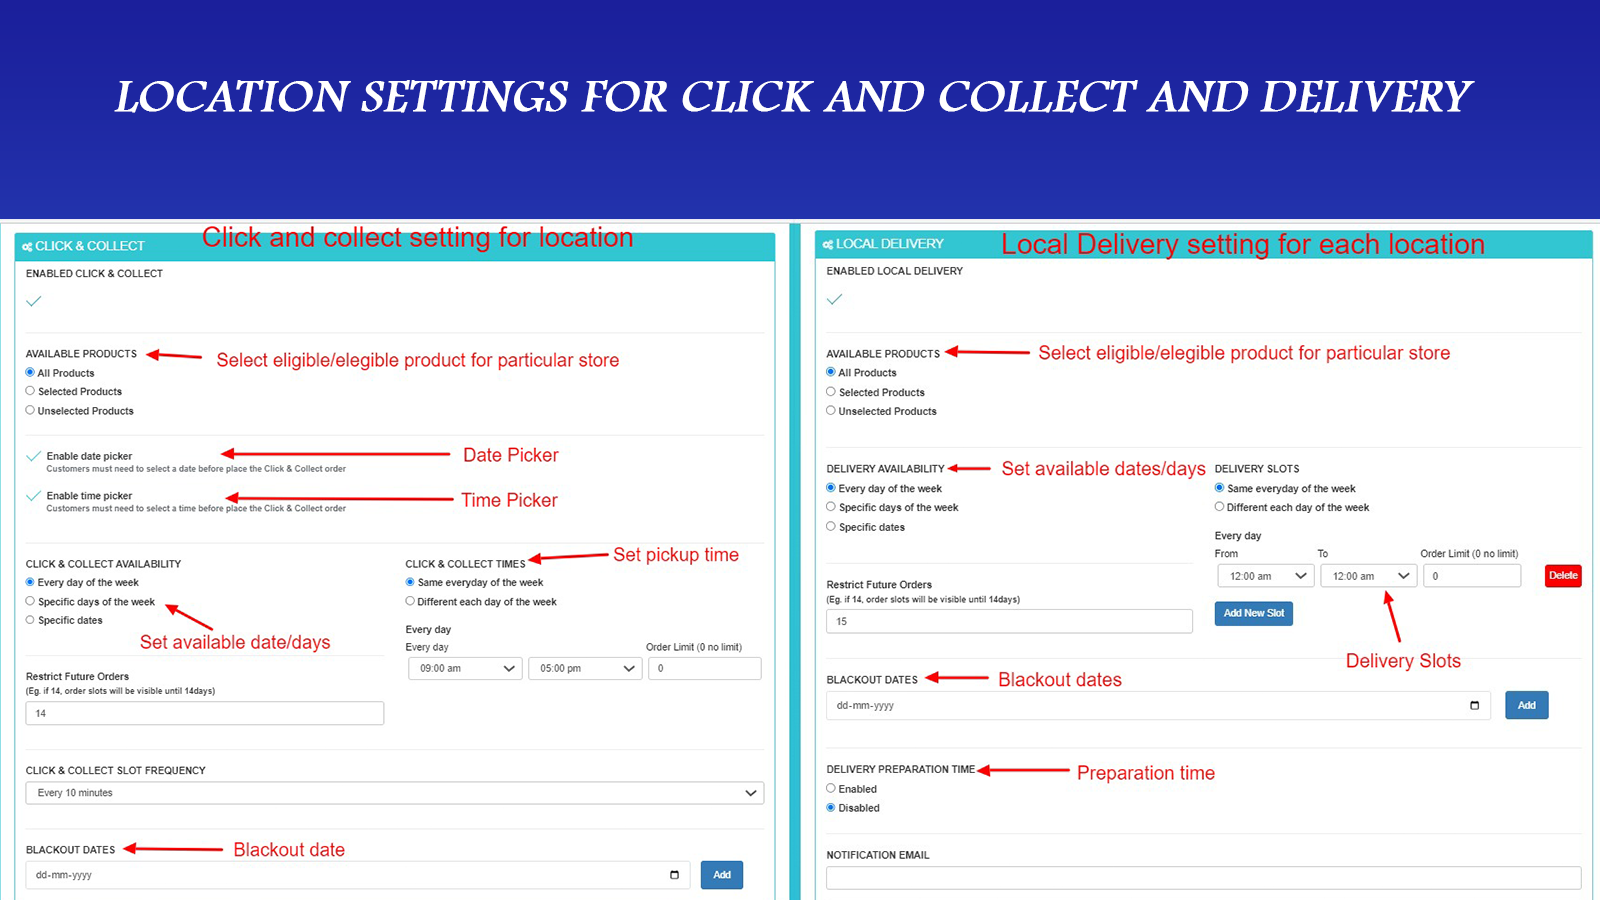 Click and Collect Pickup delivery setting for each location